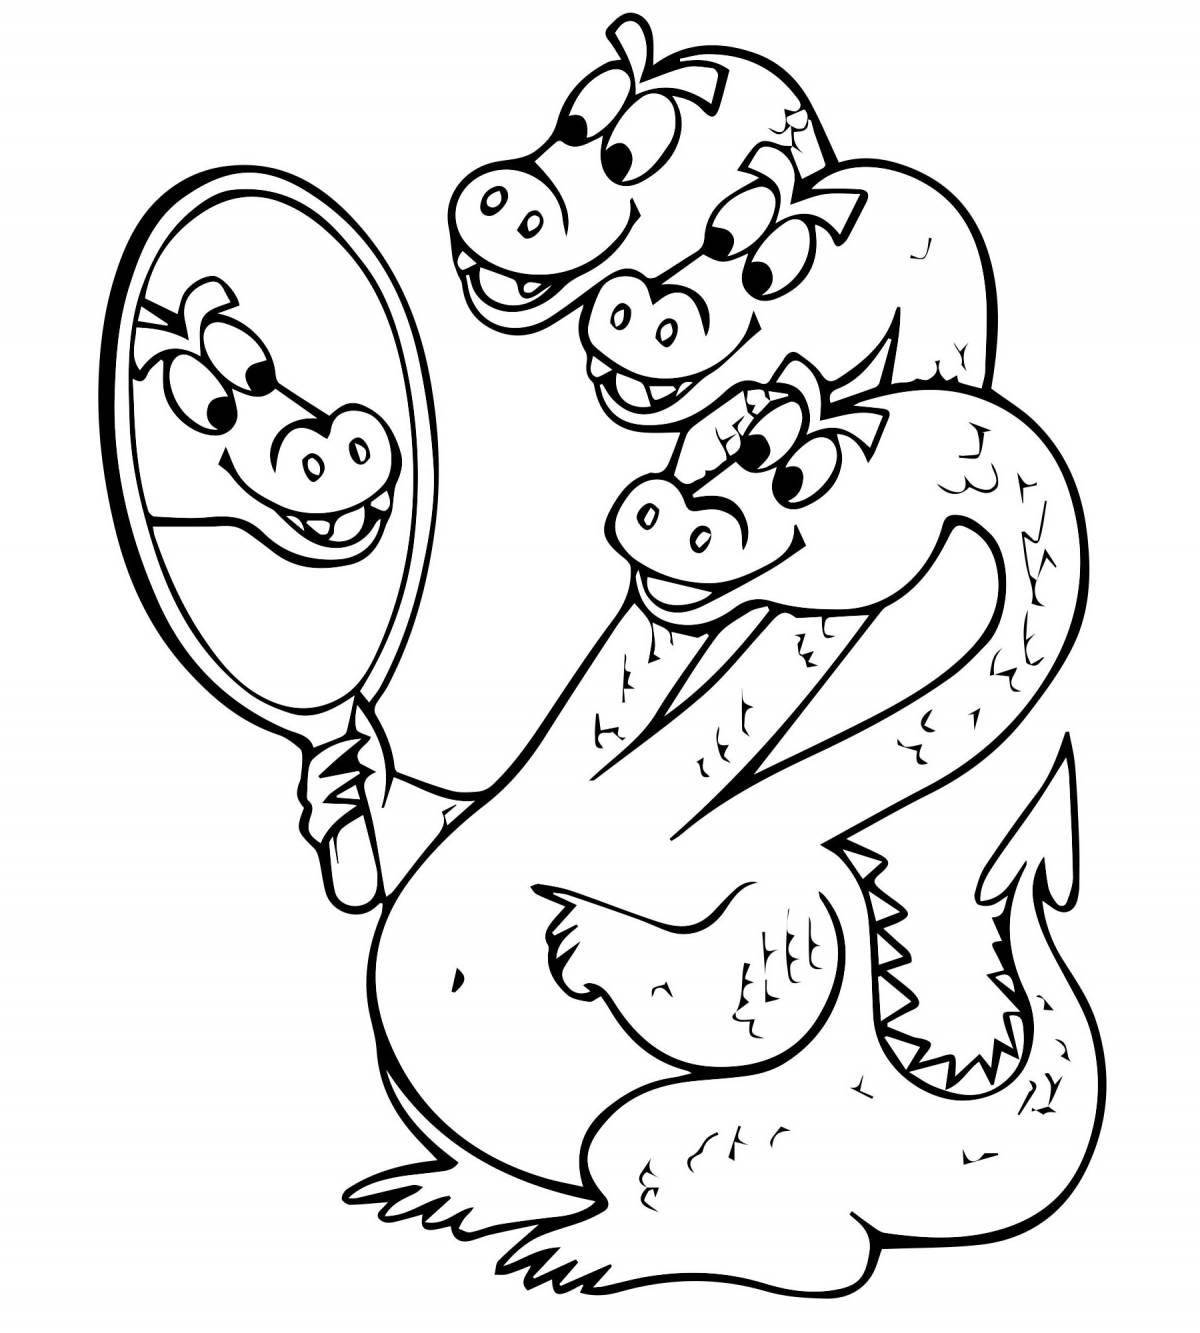 Great dragon coloring page